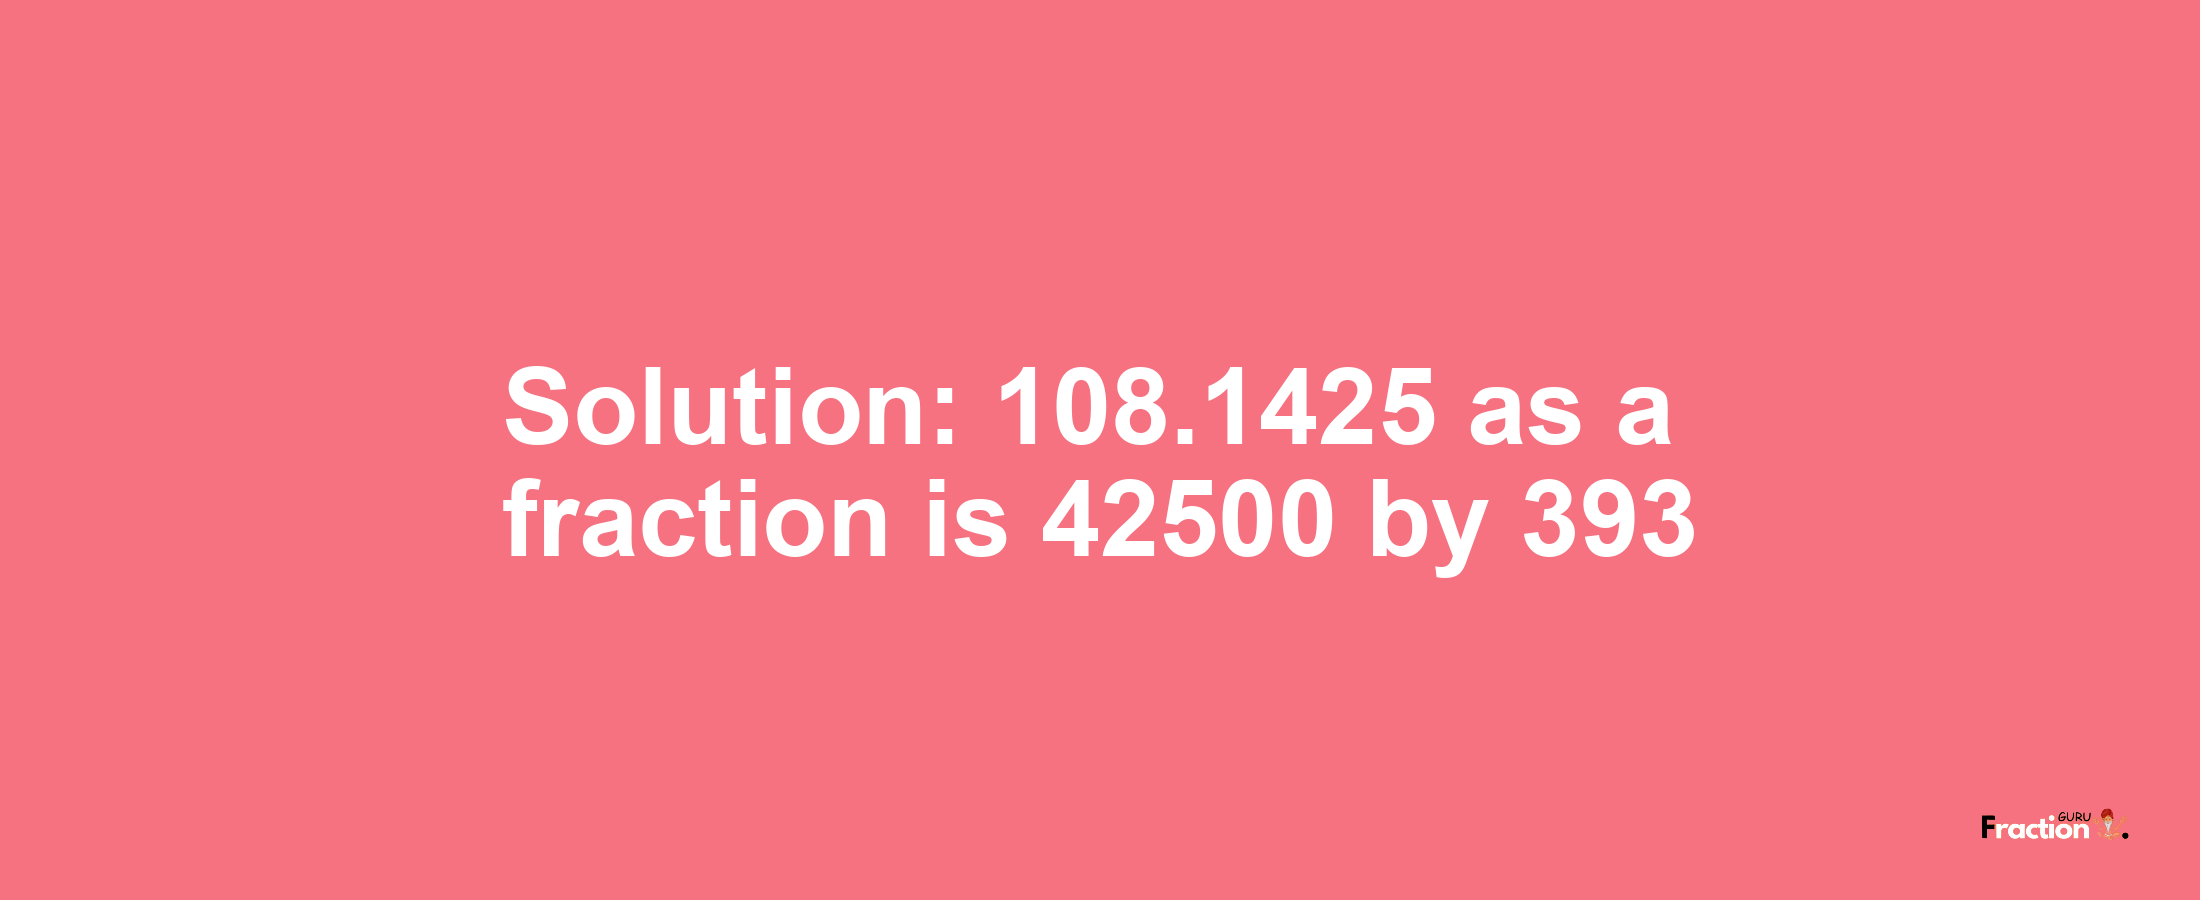 Solution:108.1425 as a fraction is 42500/393